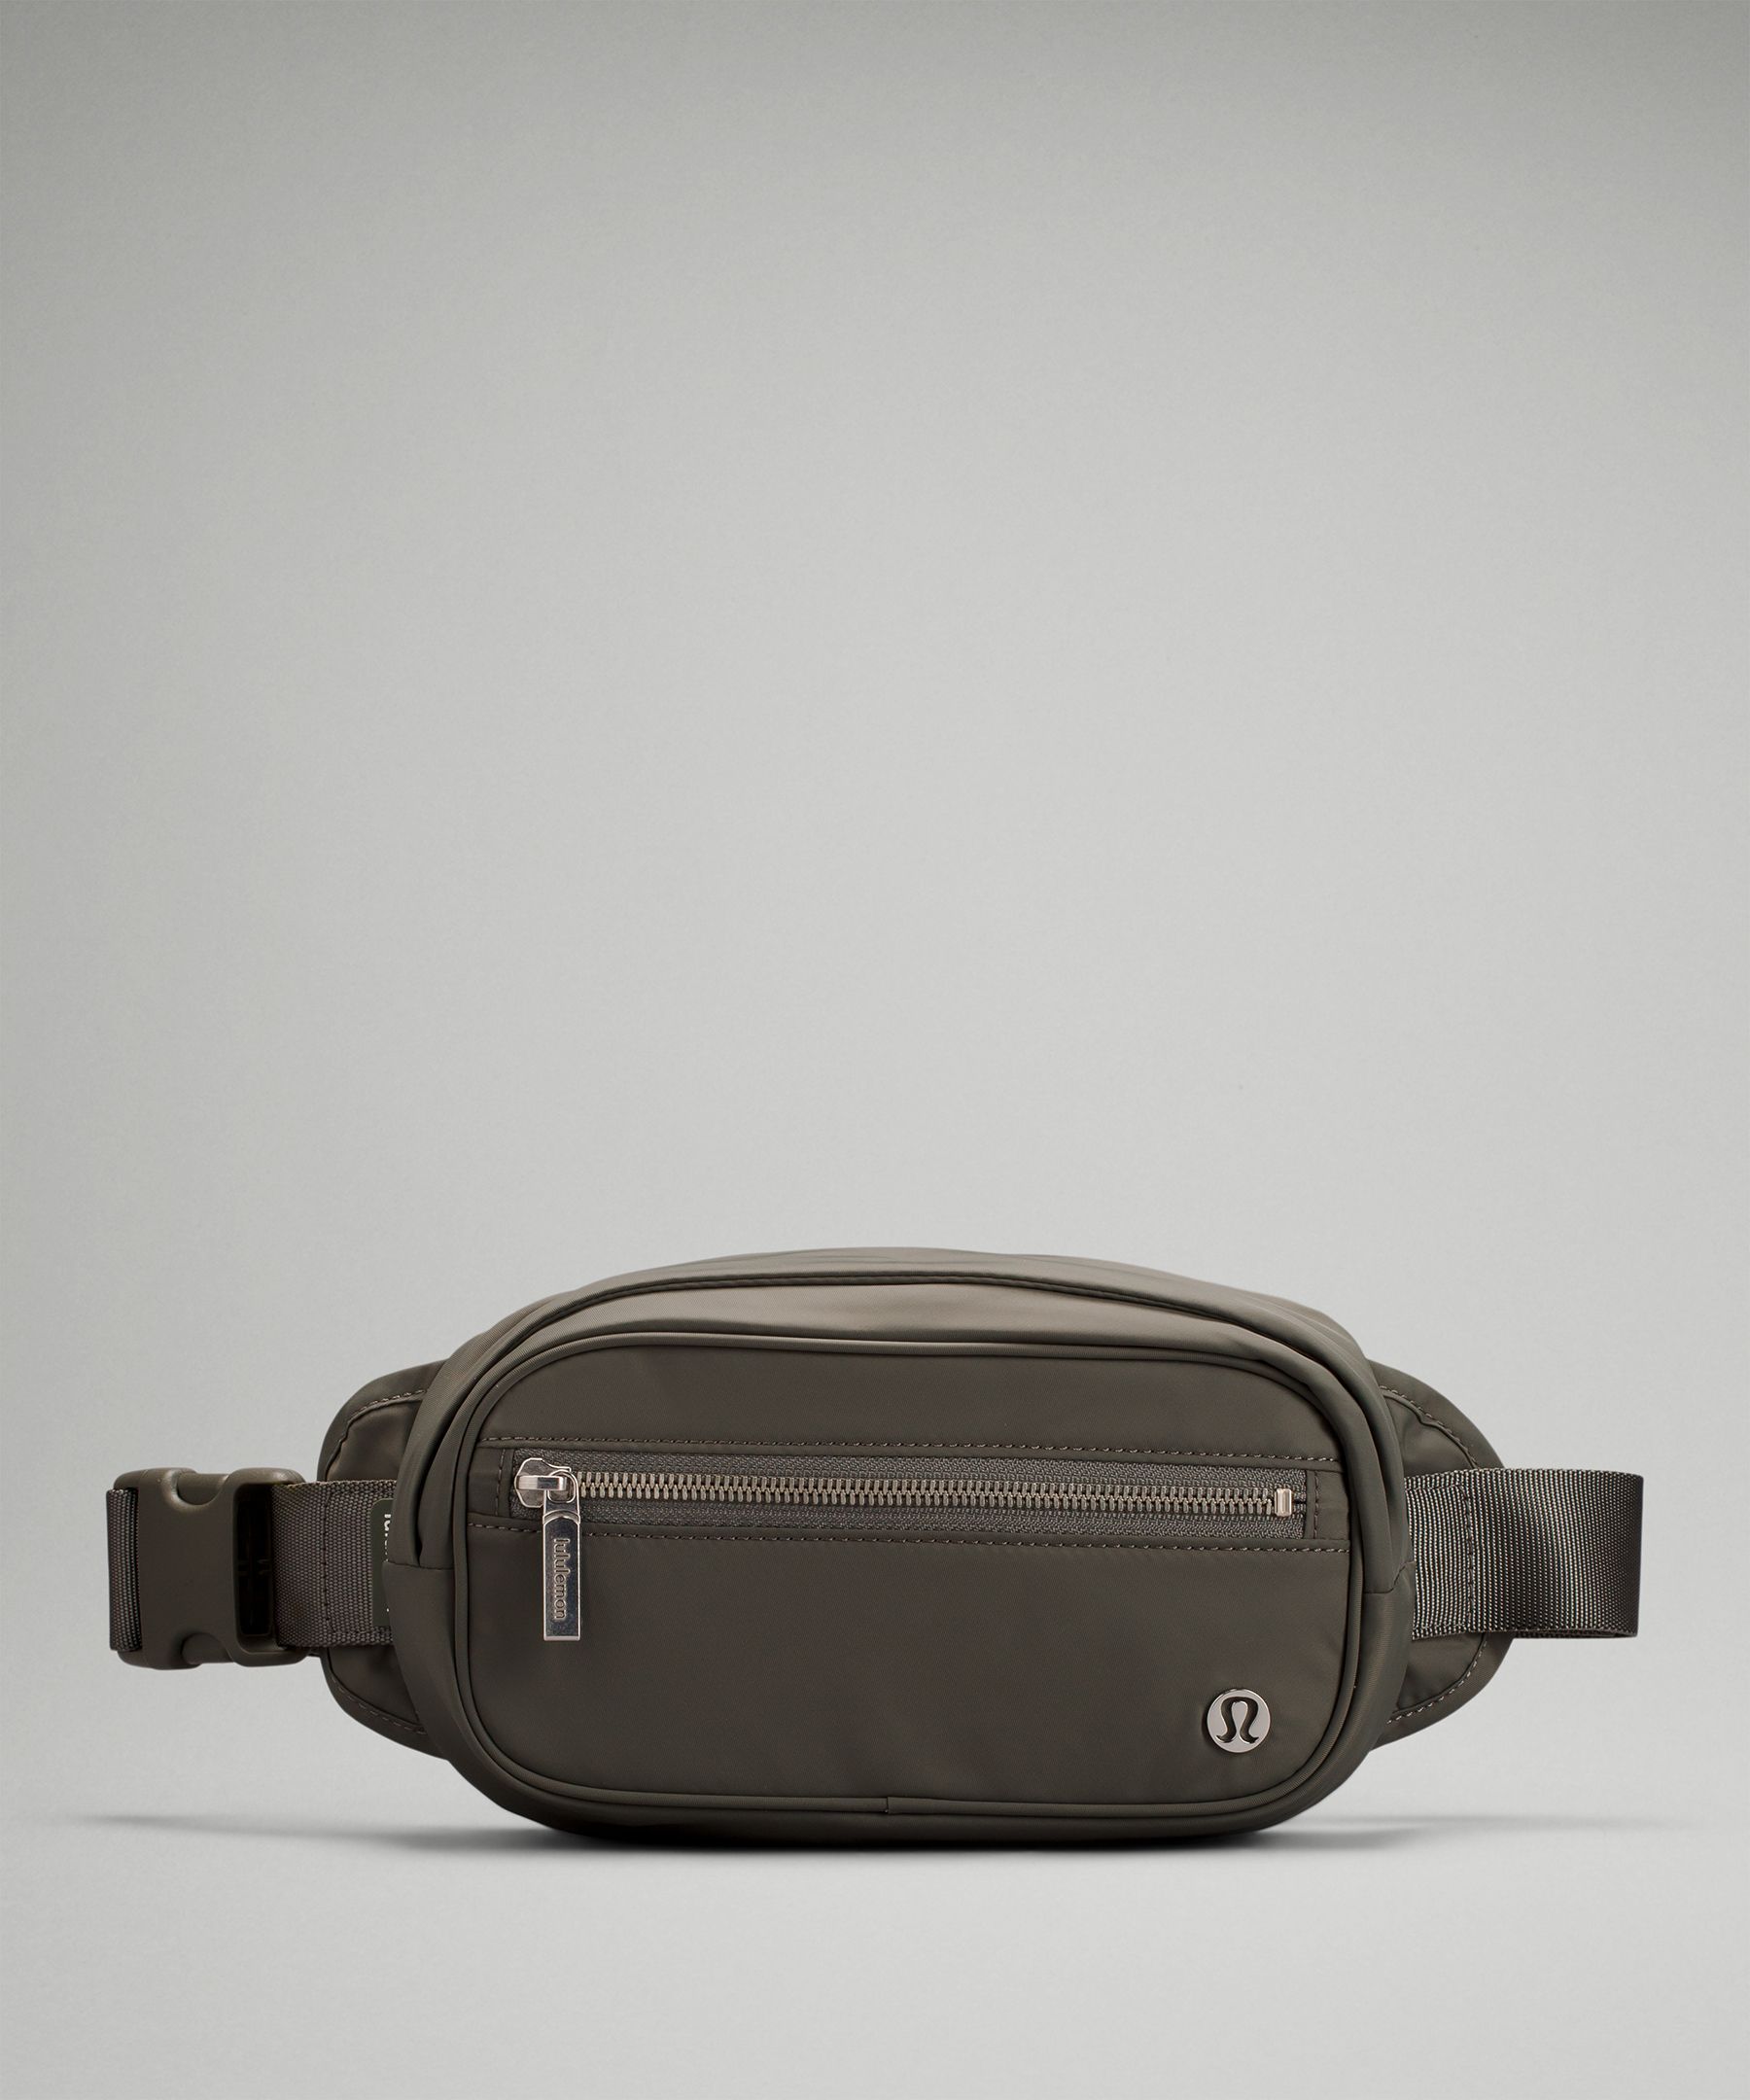 Lululemon's Everywhere Belt Bag Is In Stock In 11 Colors - Forbes